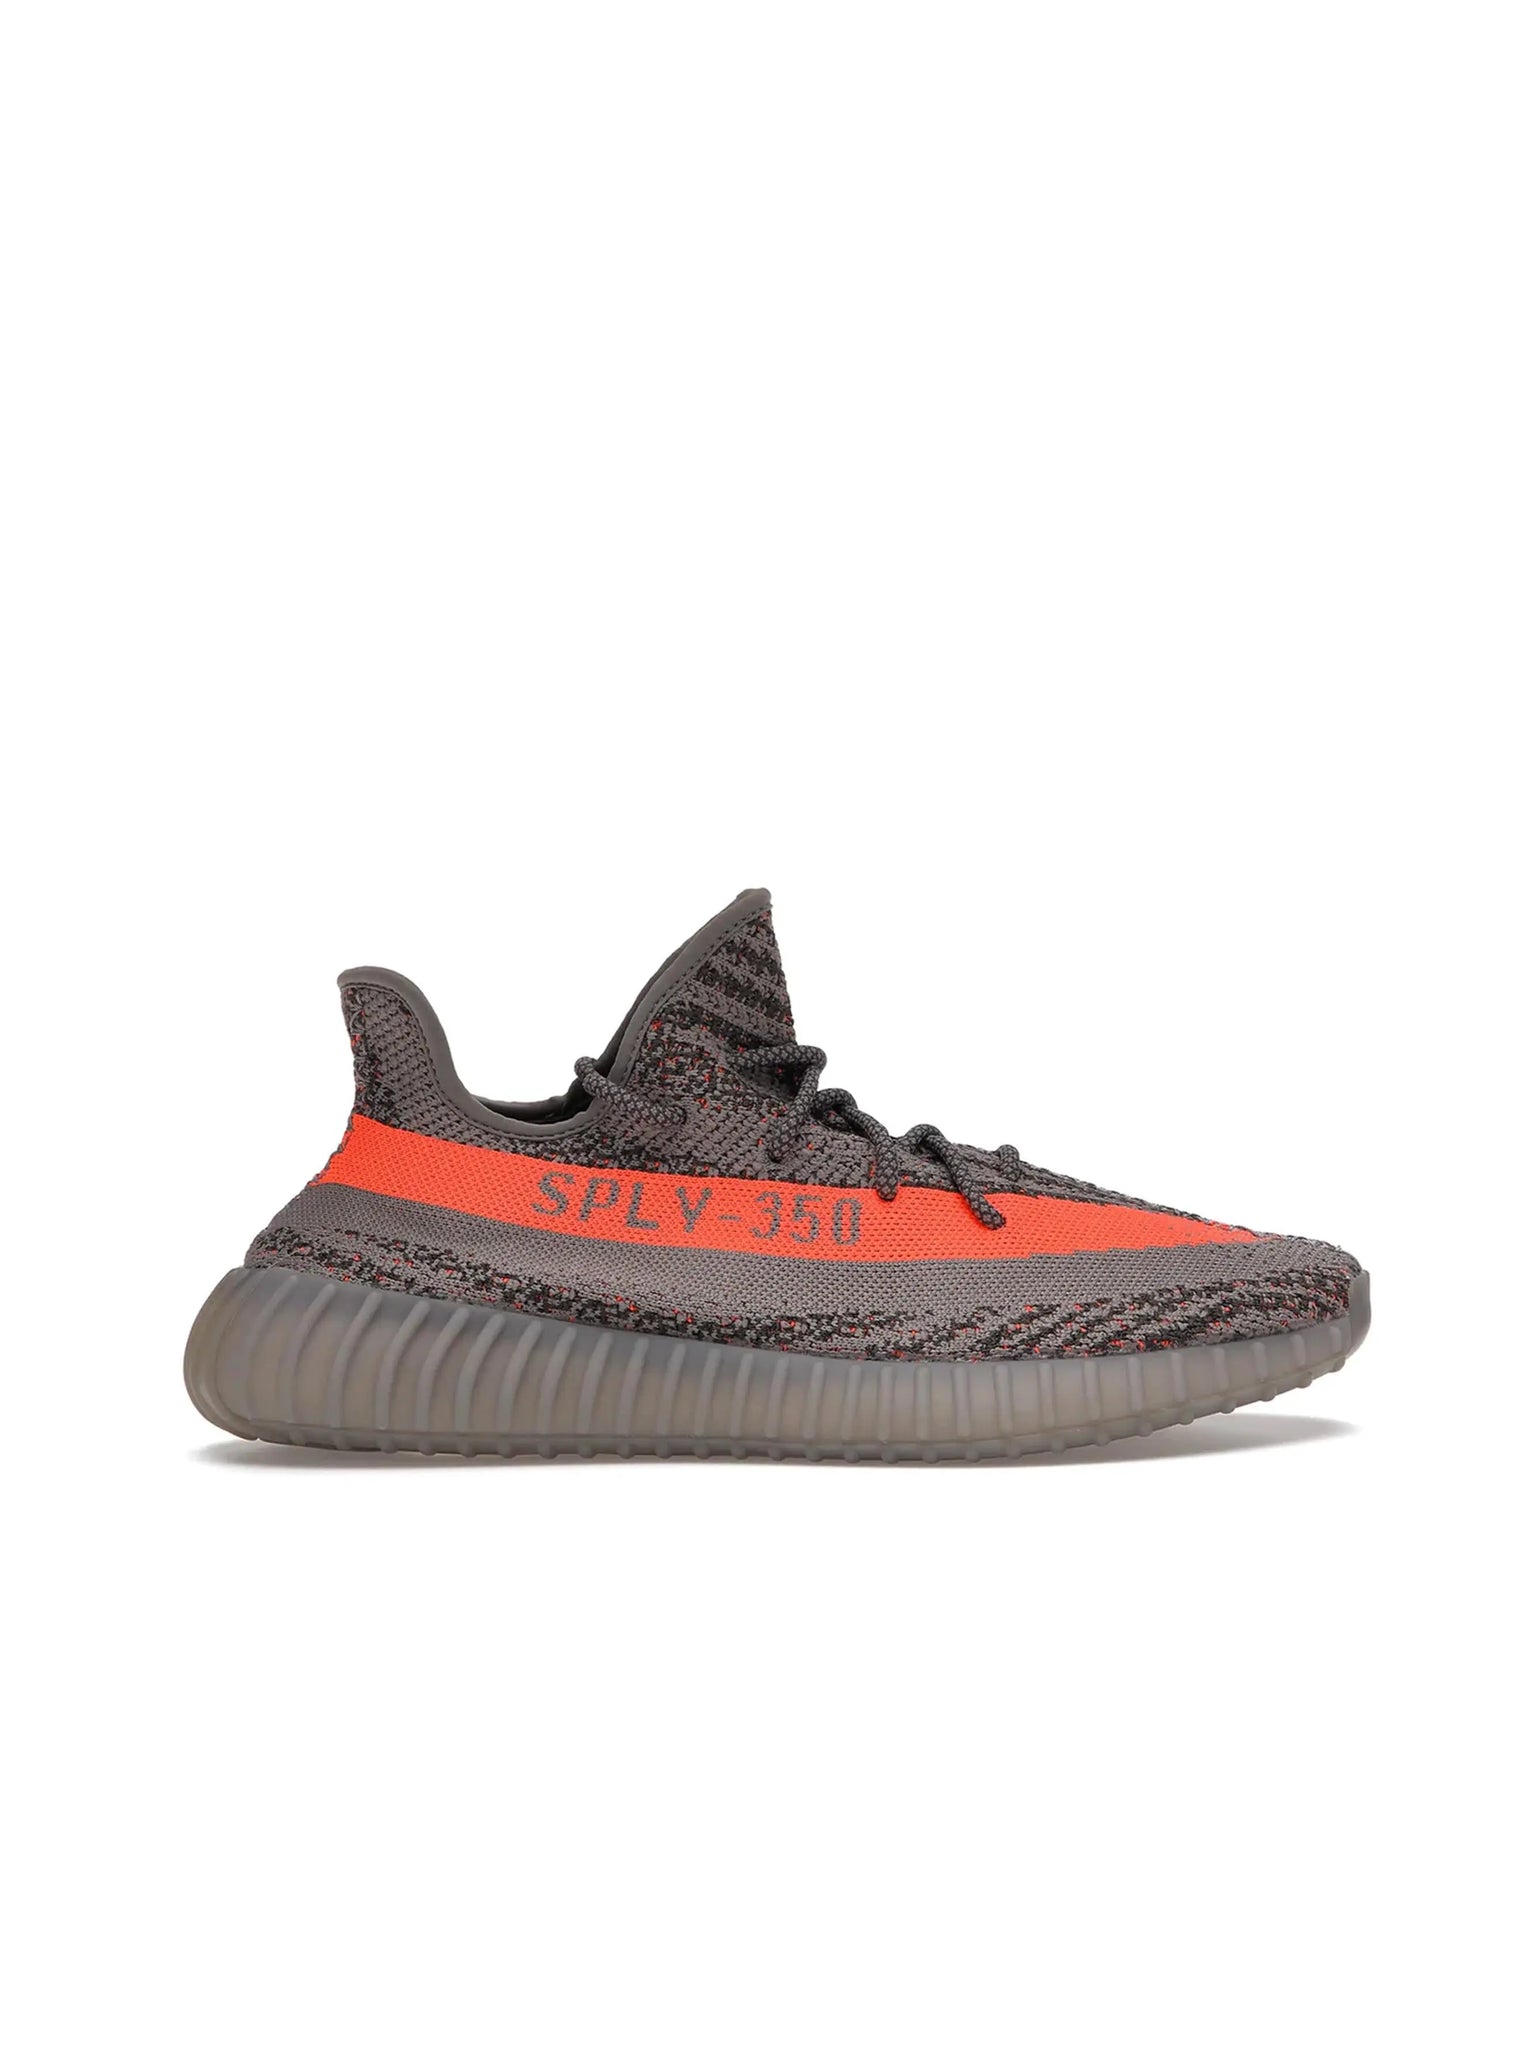 adidas Yeezy Boost 350 V2 Beluga Reflective in Auckland, New Zealand - Shop name